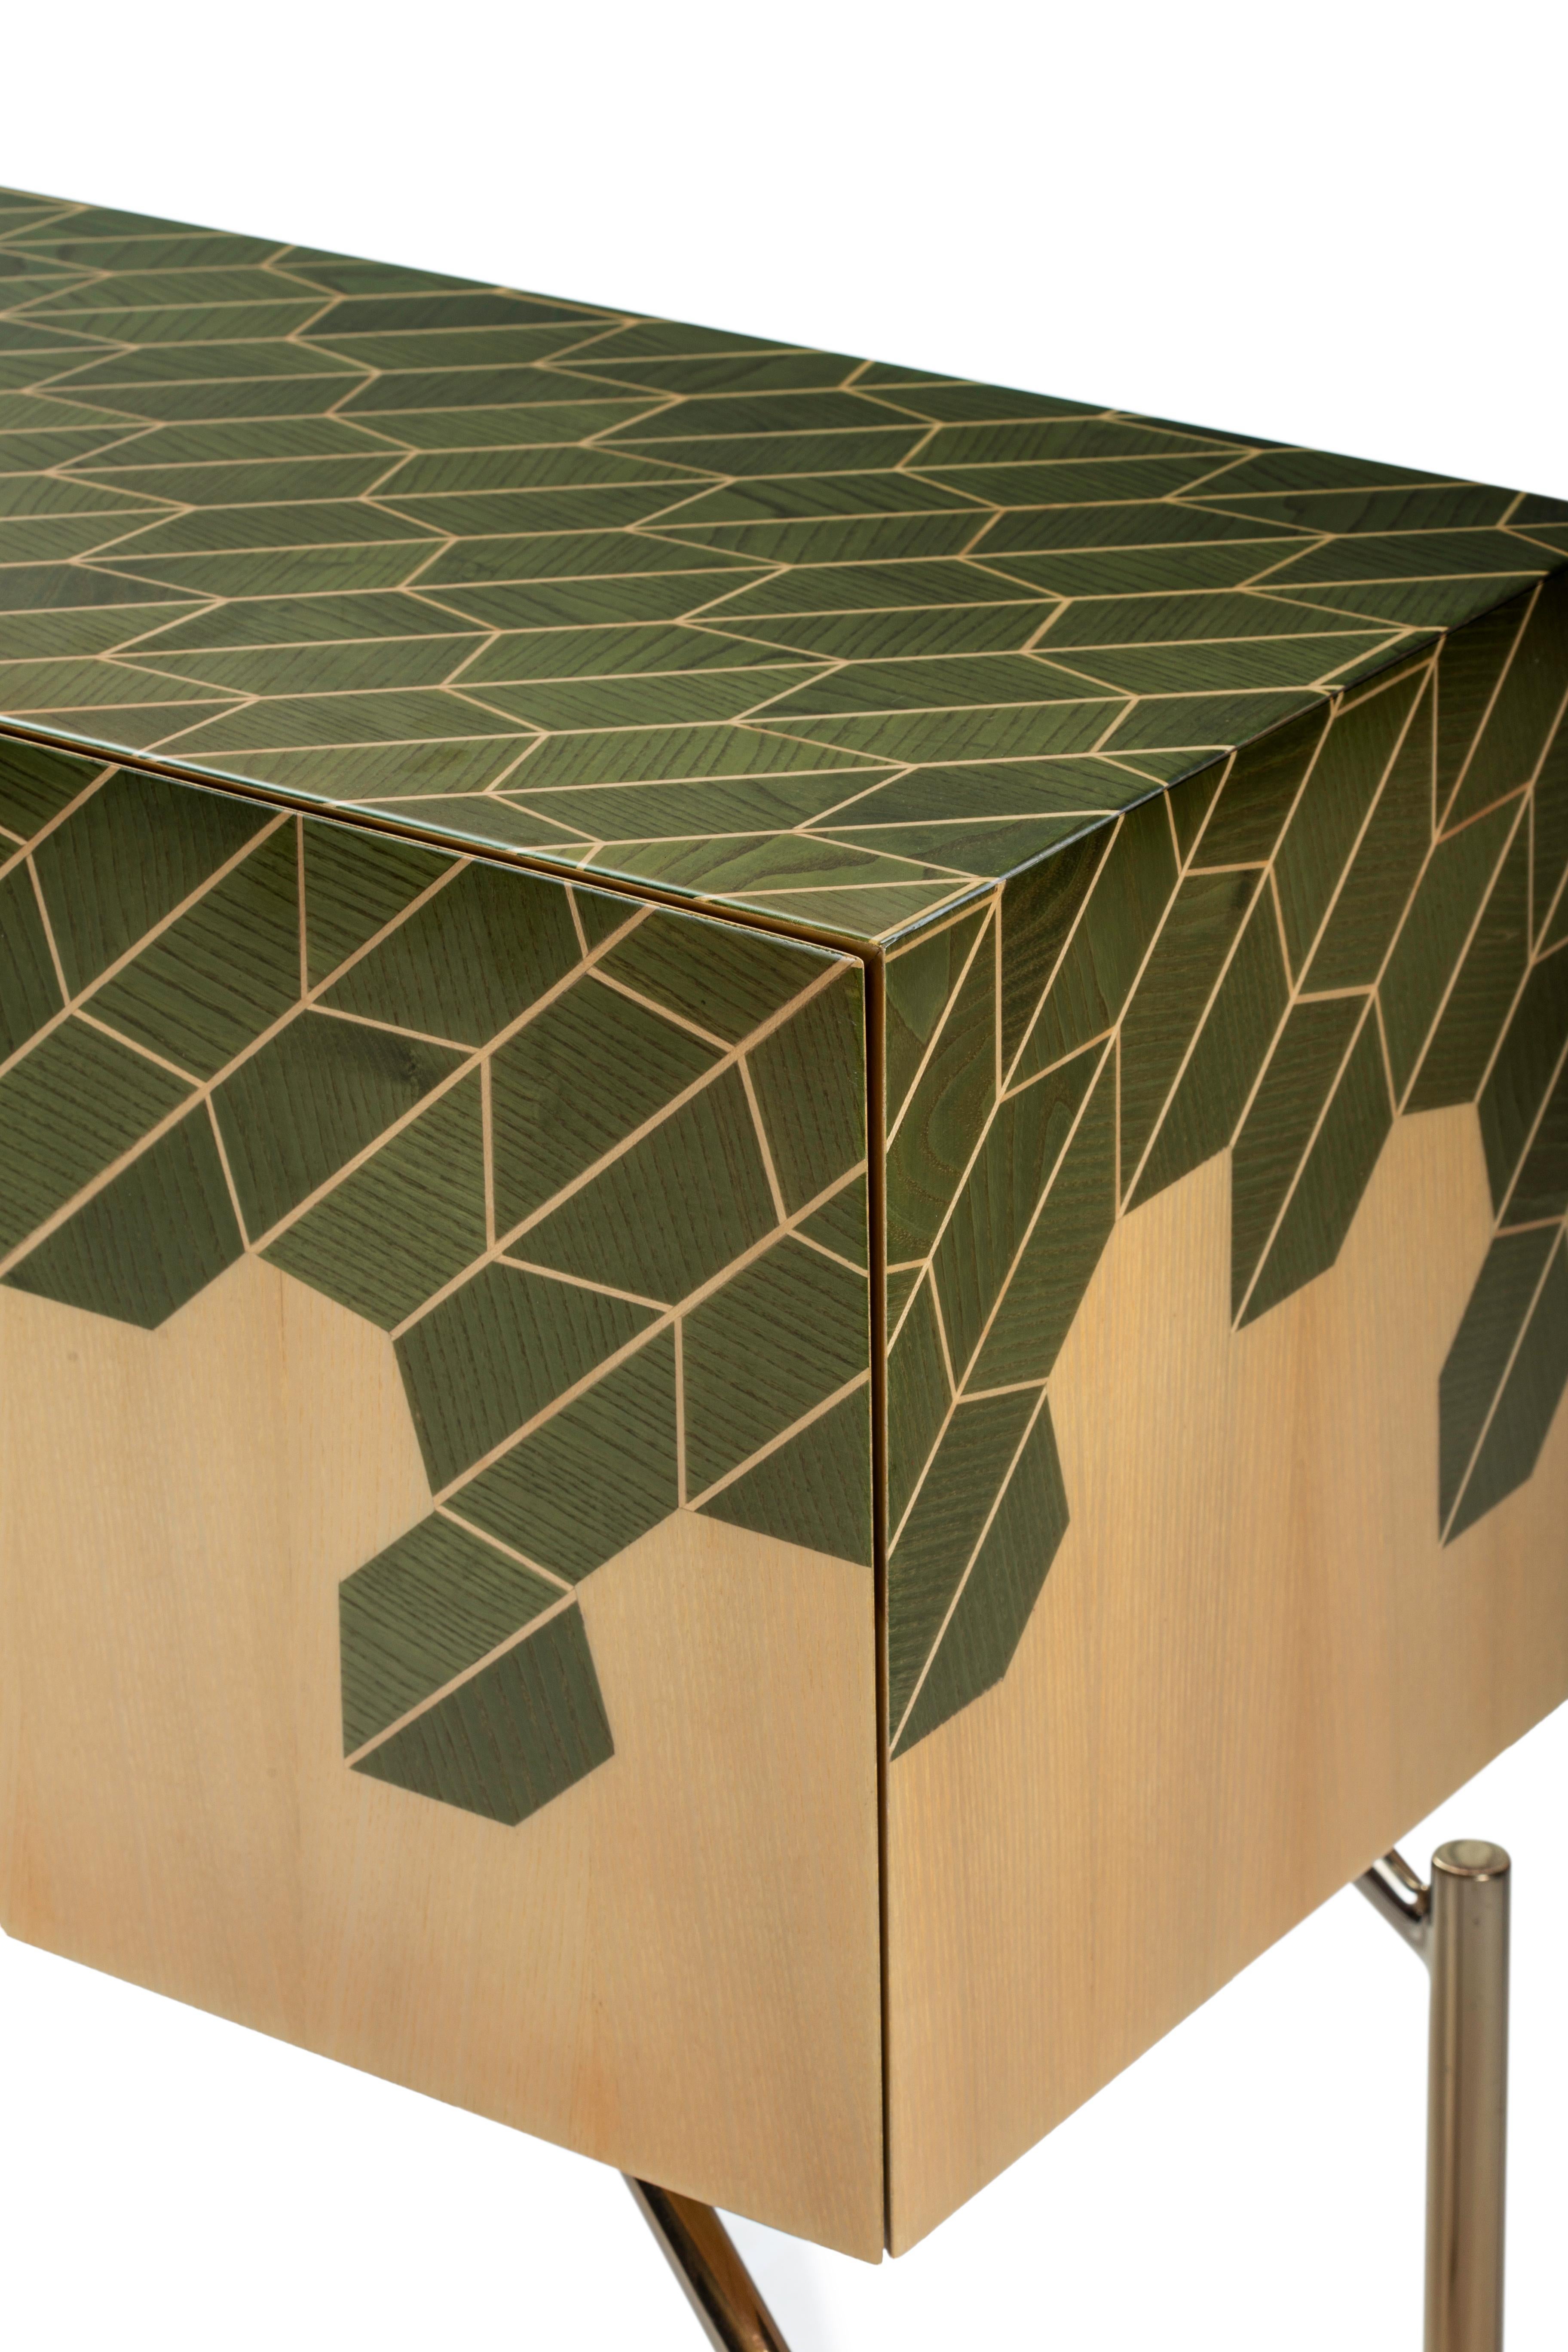 Hand-Crafted 21st Century Primavera Inlaid Sideboard 45° Cut in Ash and Steel, Made in Italy For Sale